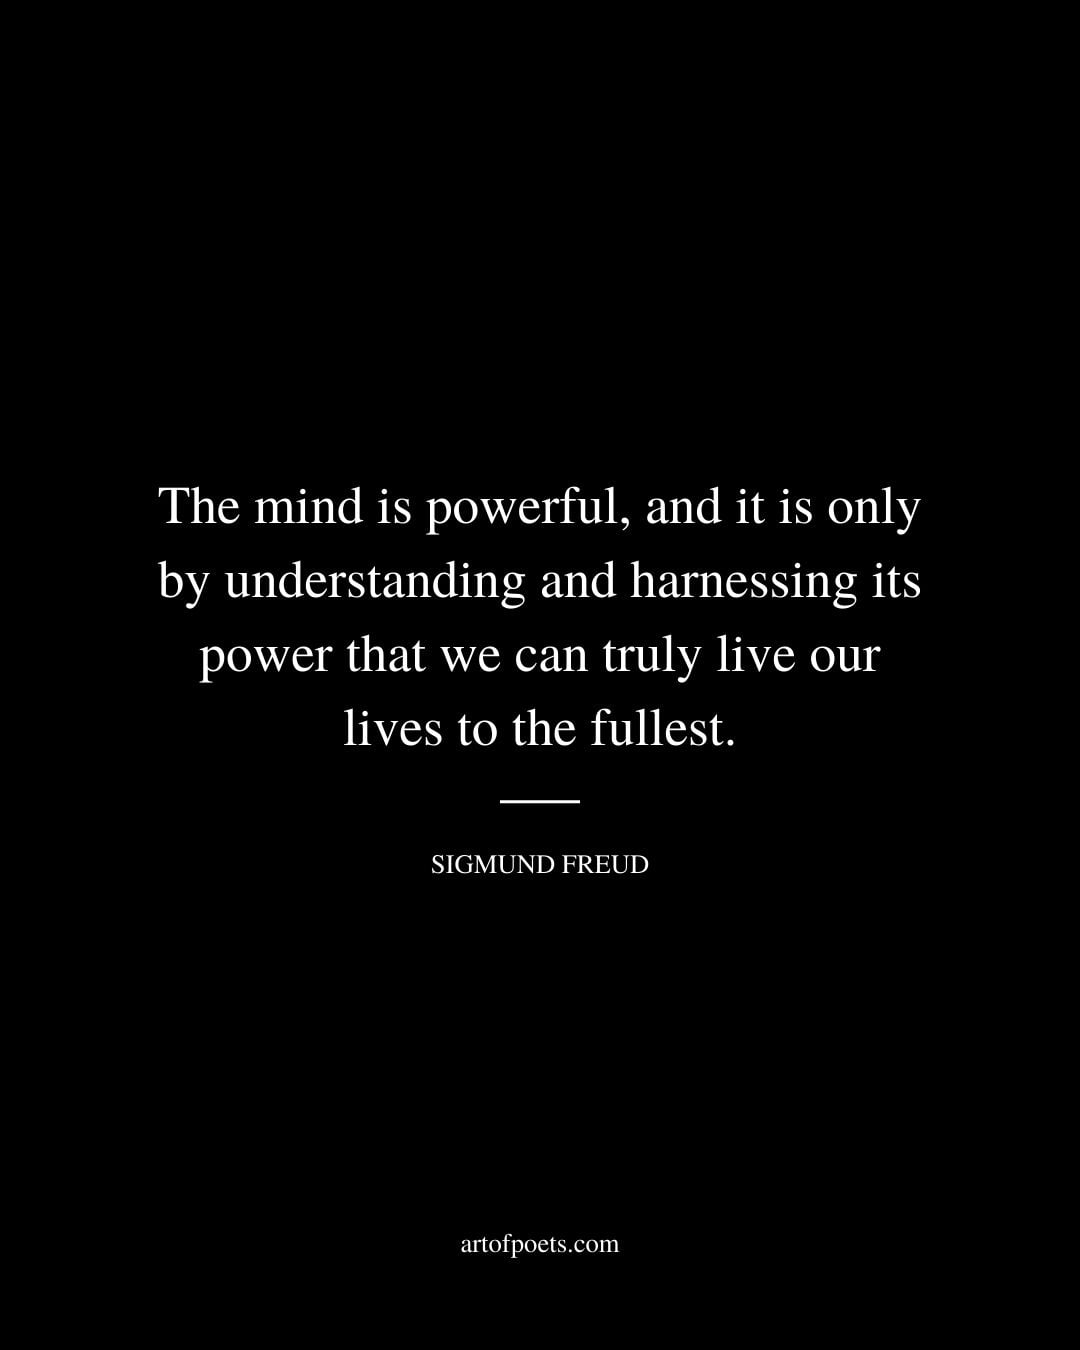 The mind is powerful and it is only by understanding and harnessing its power that we can truly live our lives to the fullest